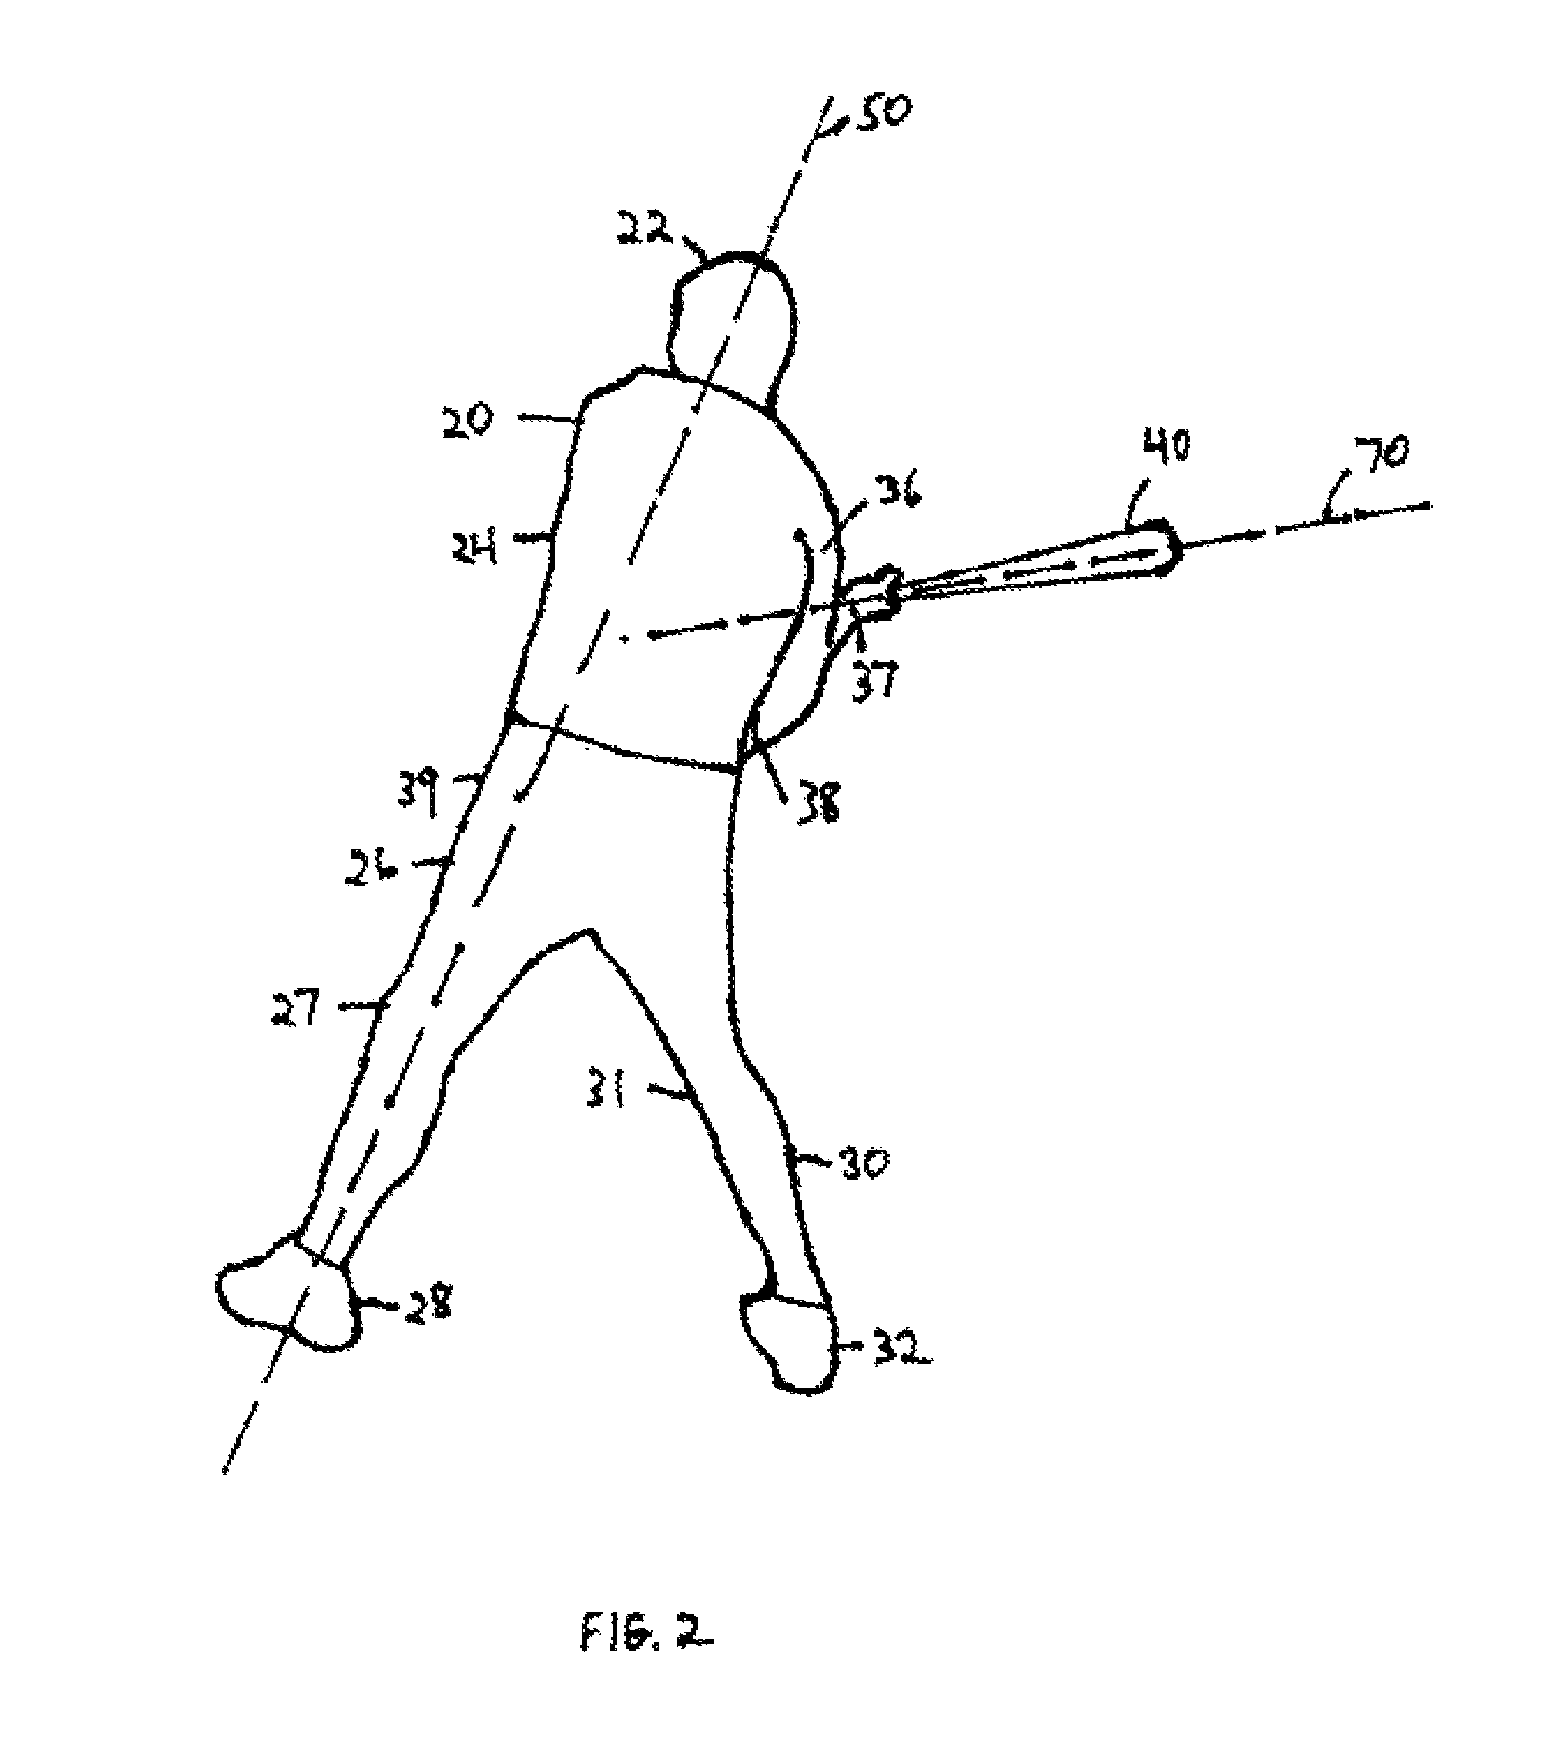 Training device and pivotal swing method for improving accuracy of hitting a ball with a bat